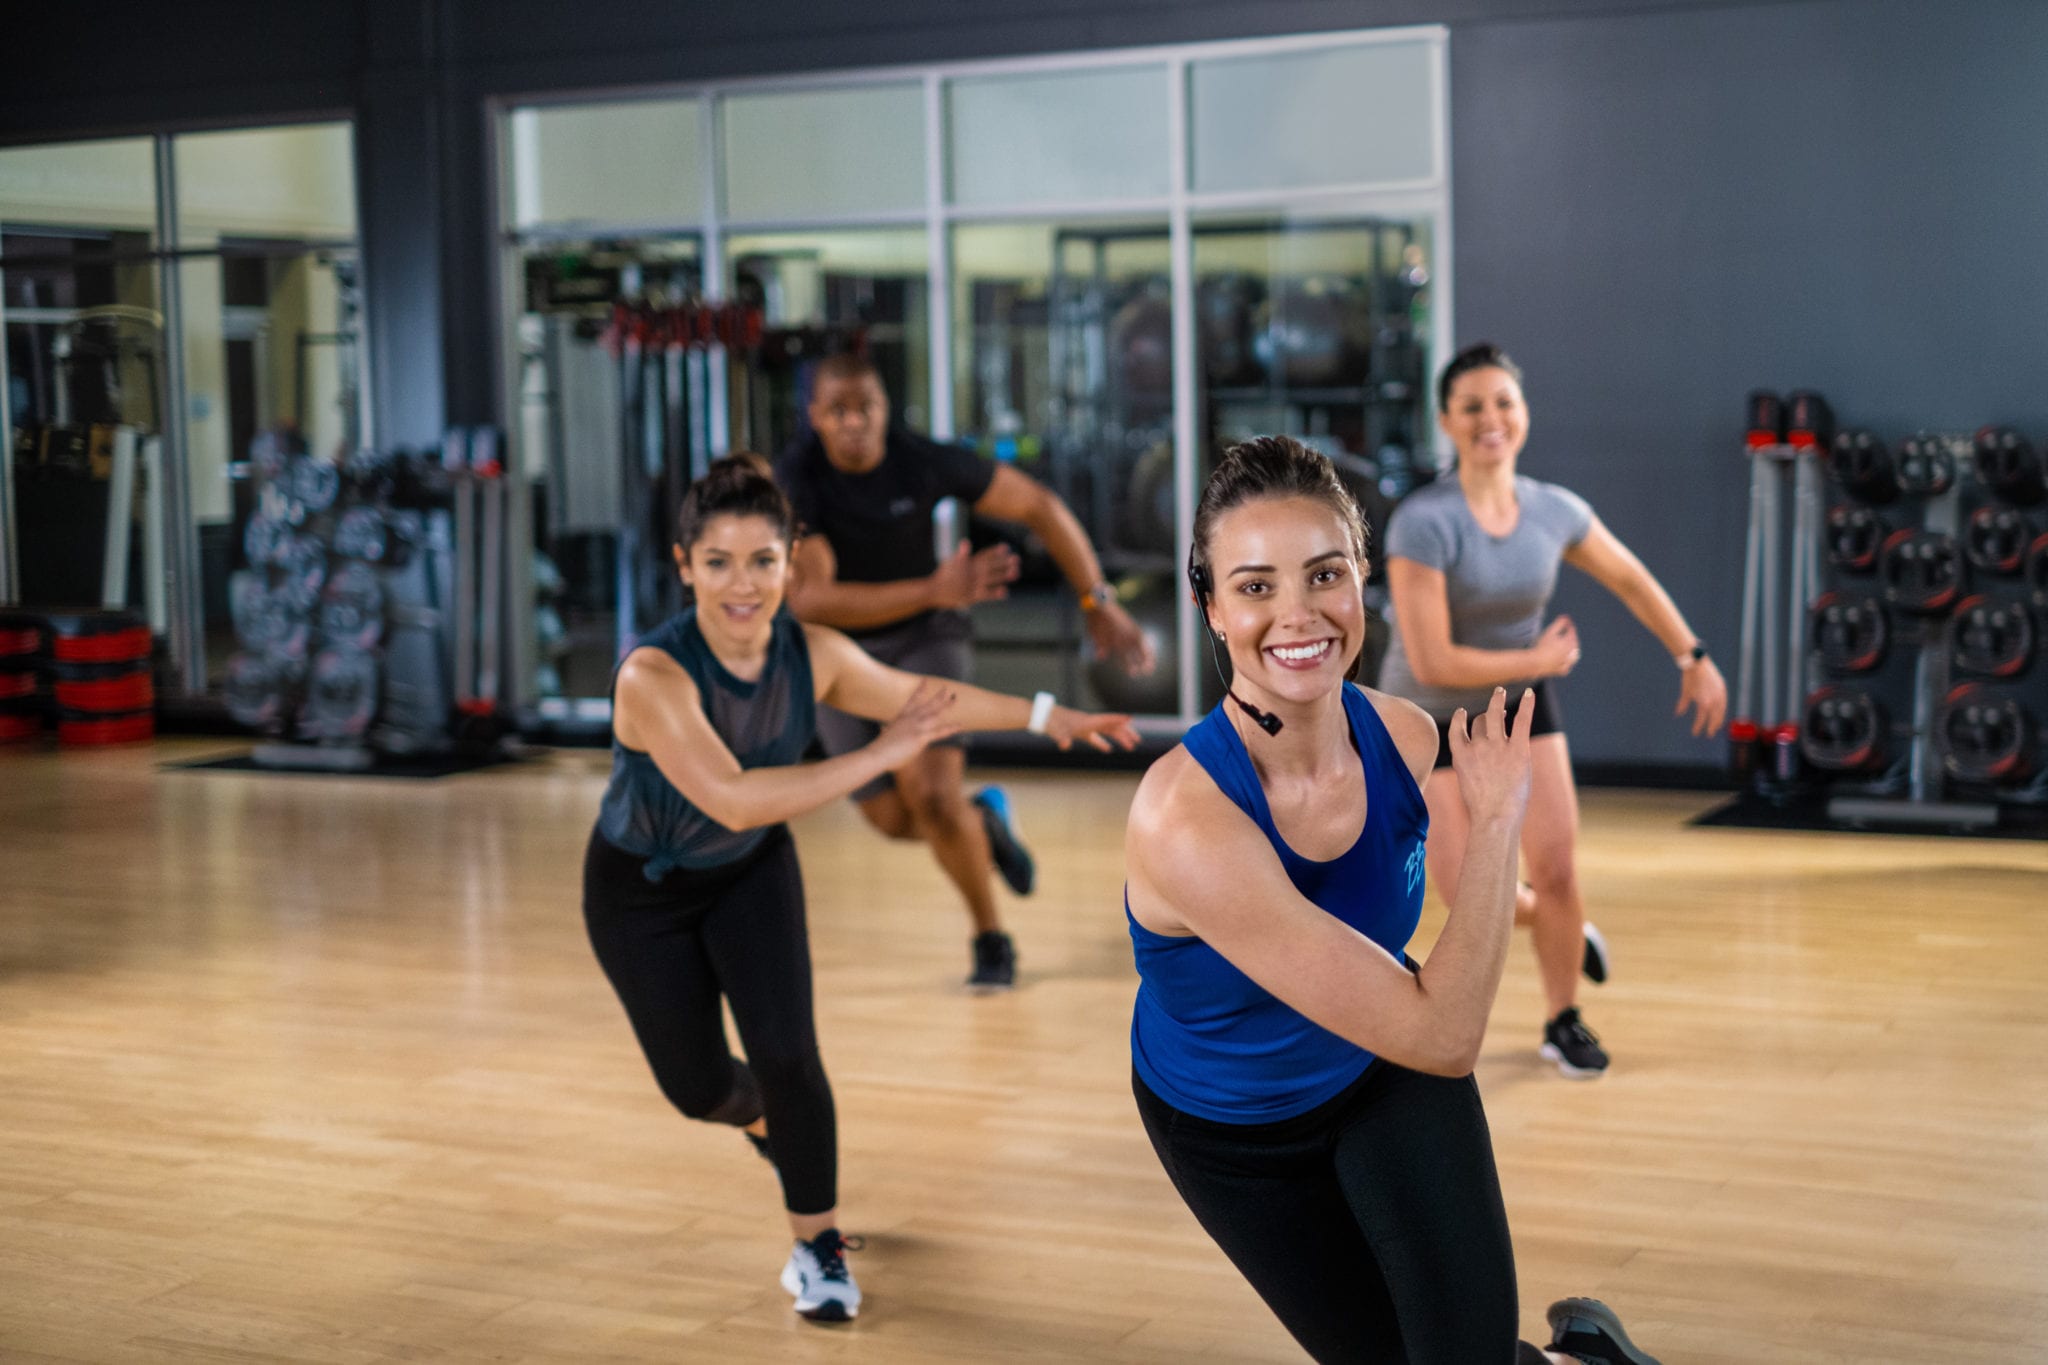 group instructor performing skate movement in fitness class at padonia gym studio